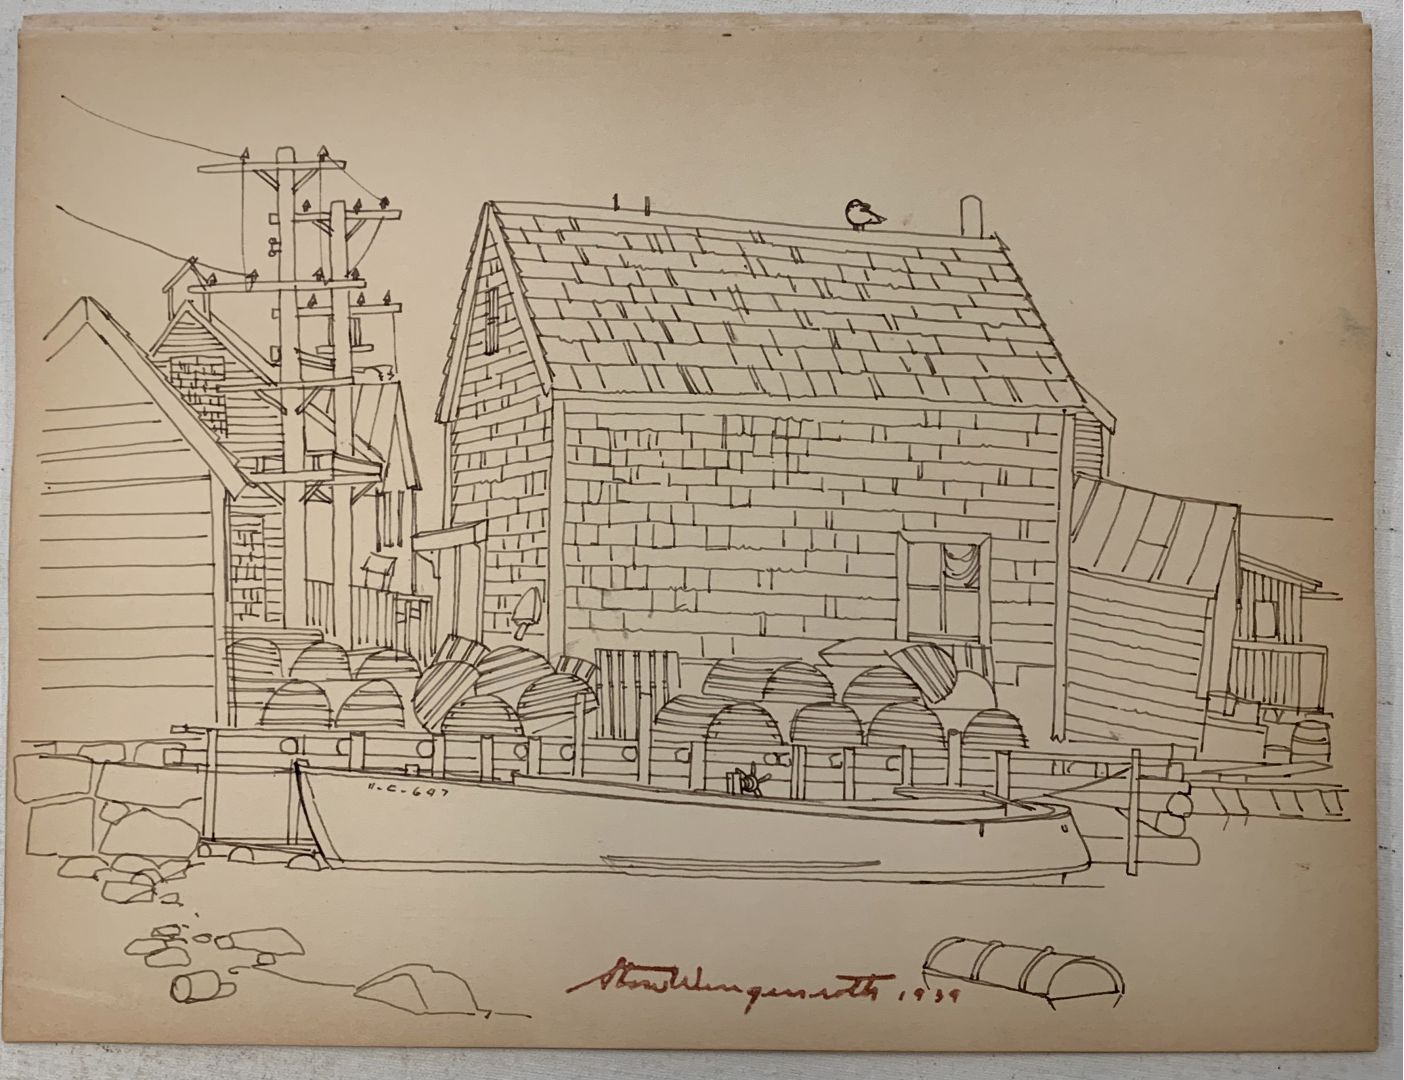 DRAWING OF BUILDINGS AND A BOAT - LIKELY PORT CLYDE, MAINE